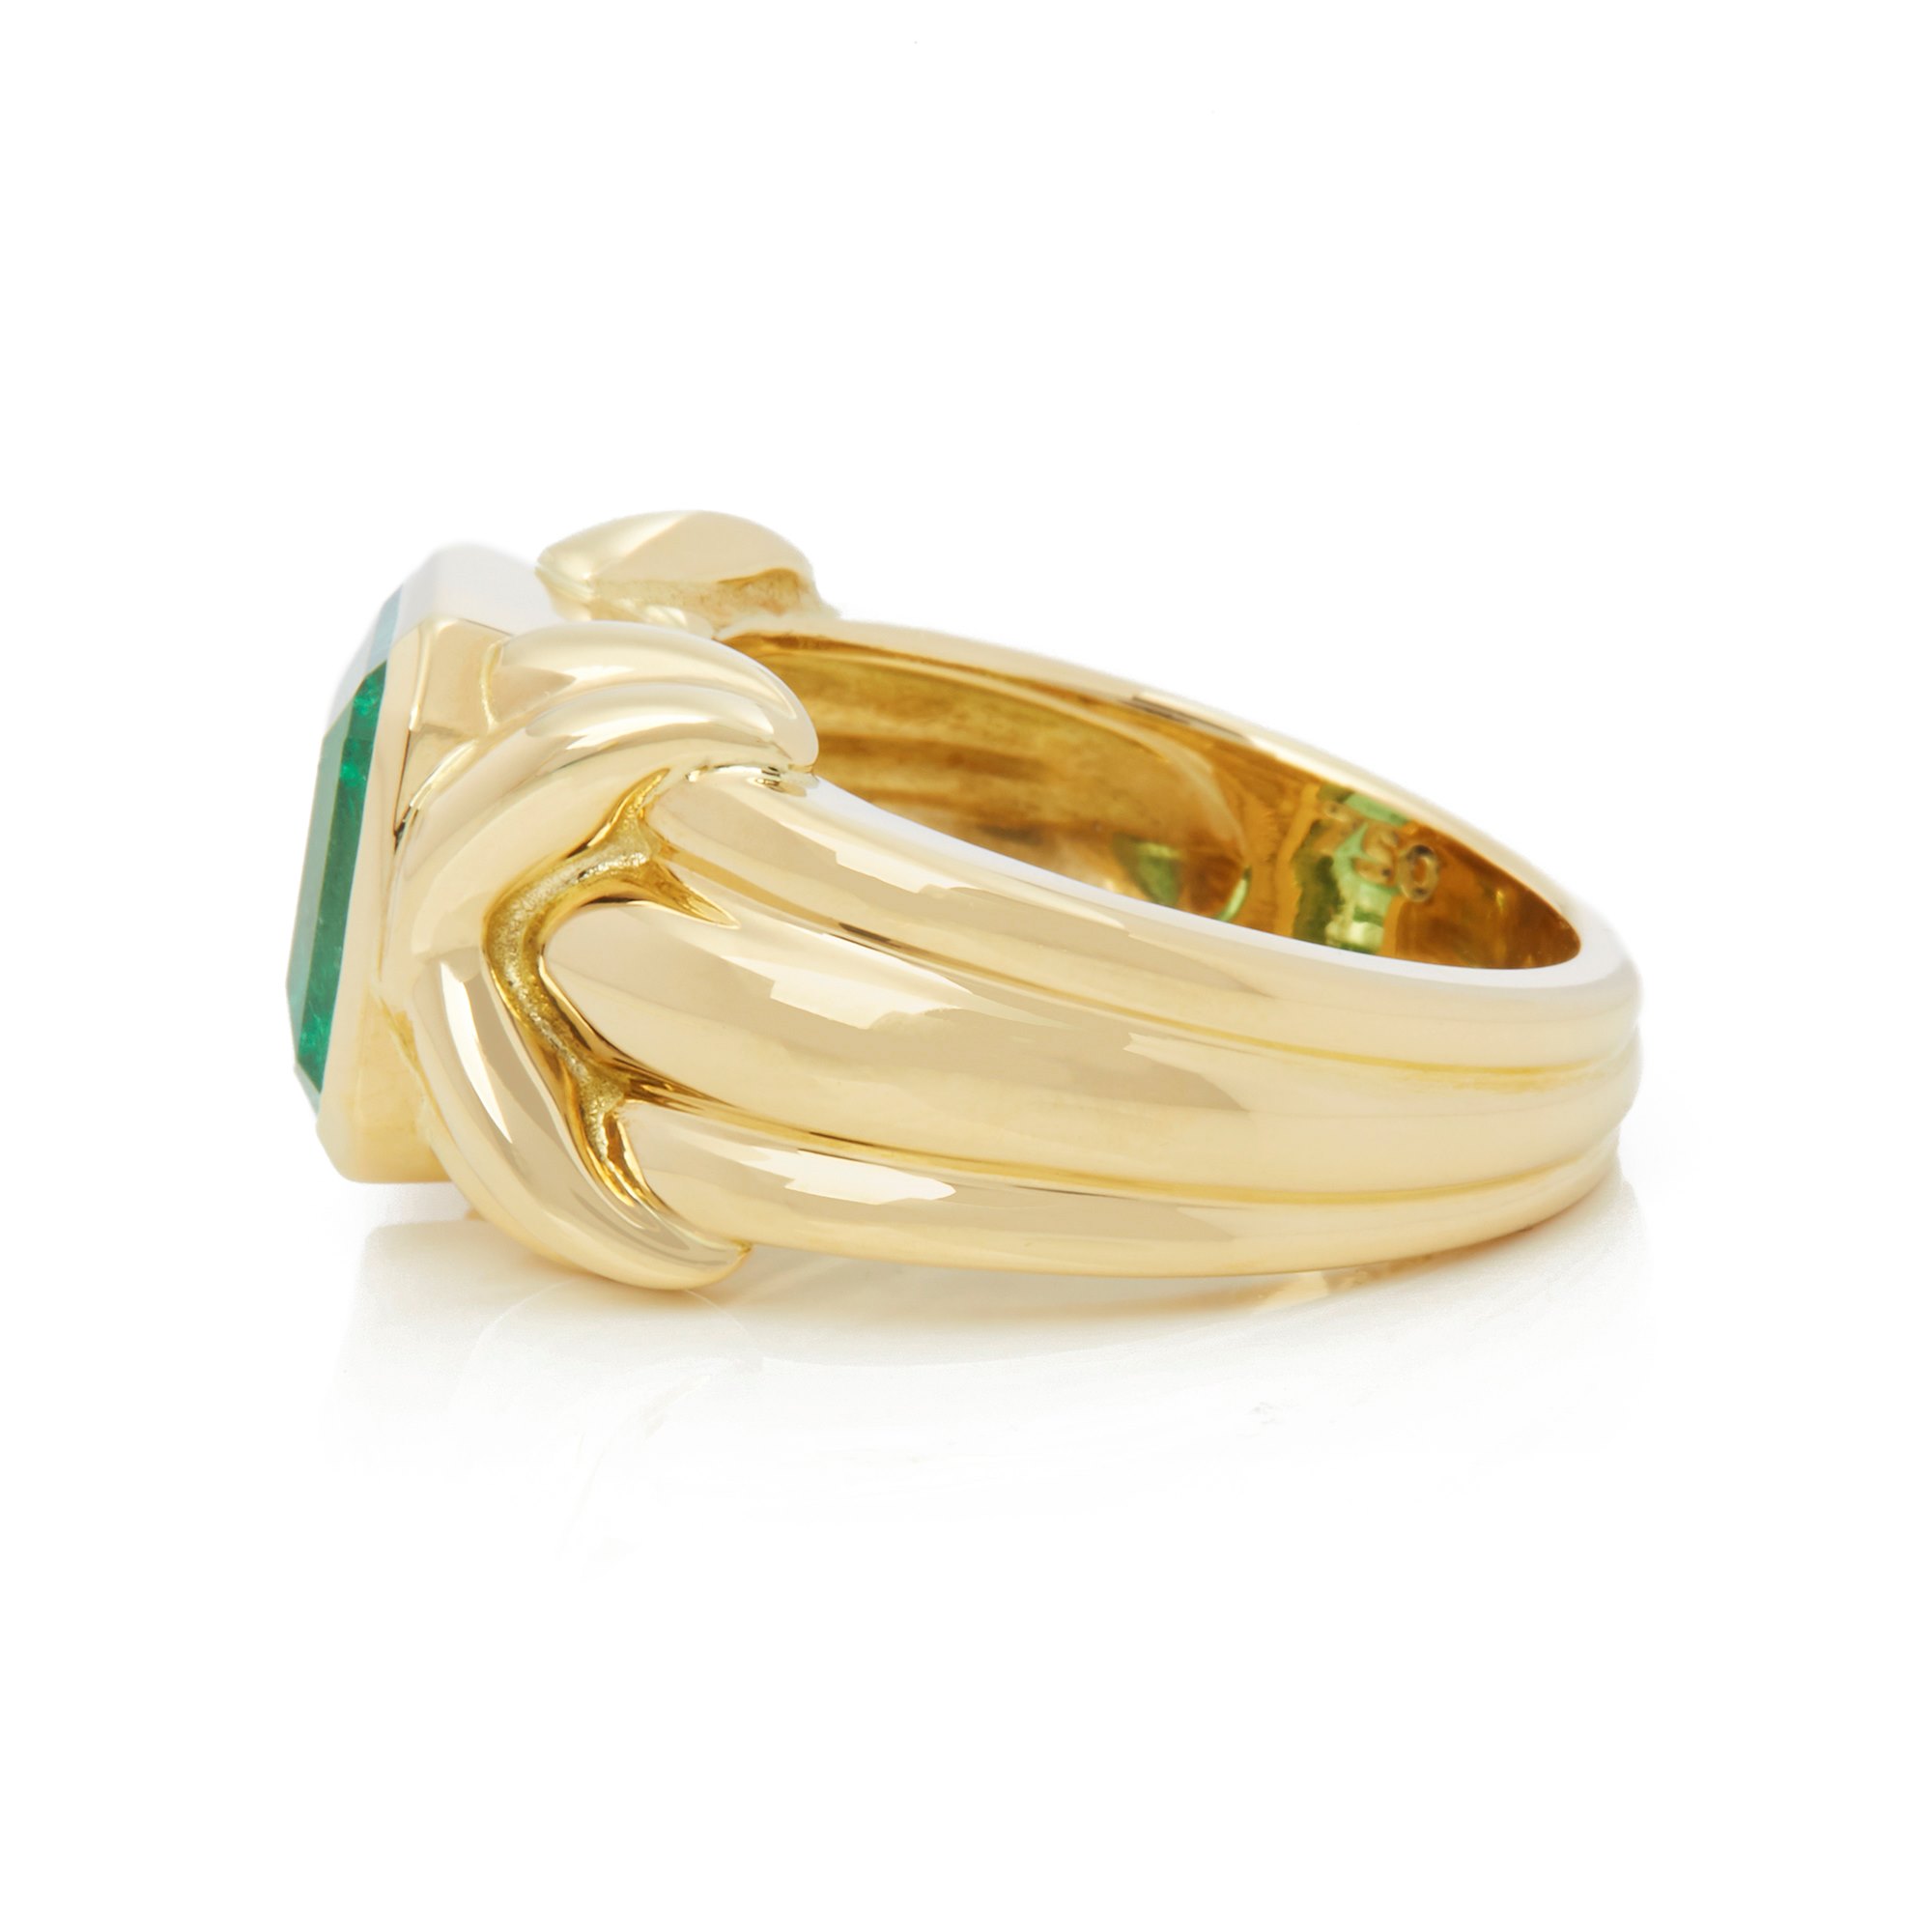 Tiffany & Co. 18k Yellow Gold Colombian Emerald Cocktail Ring